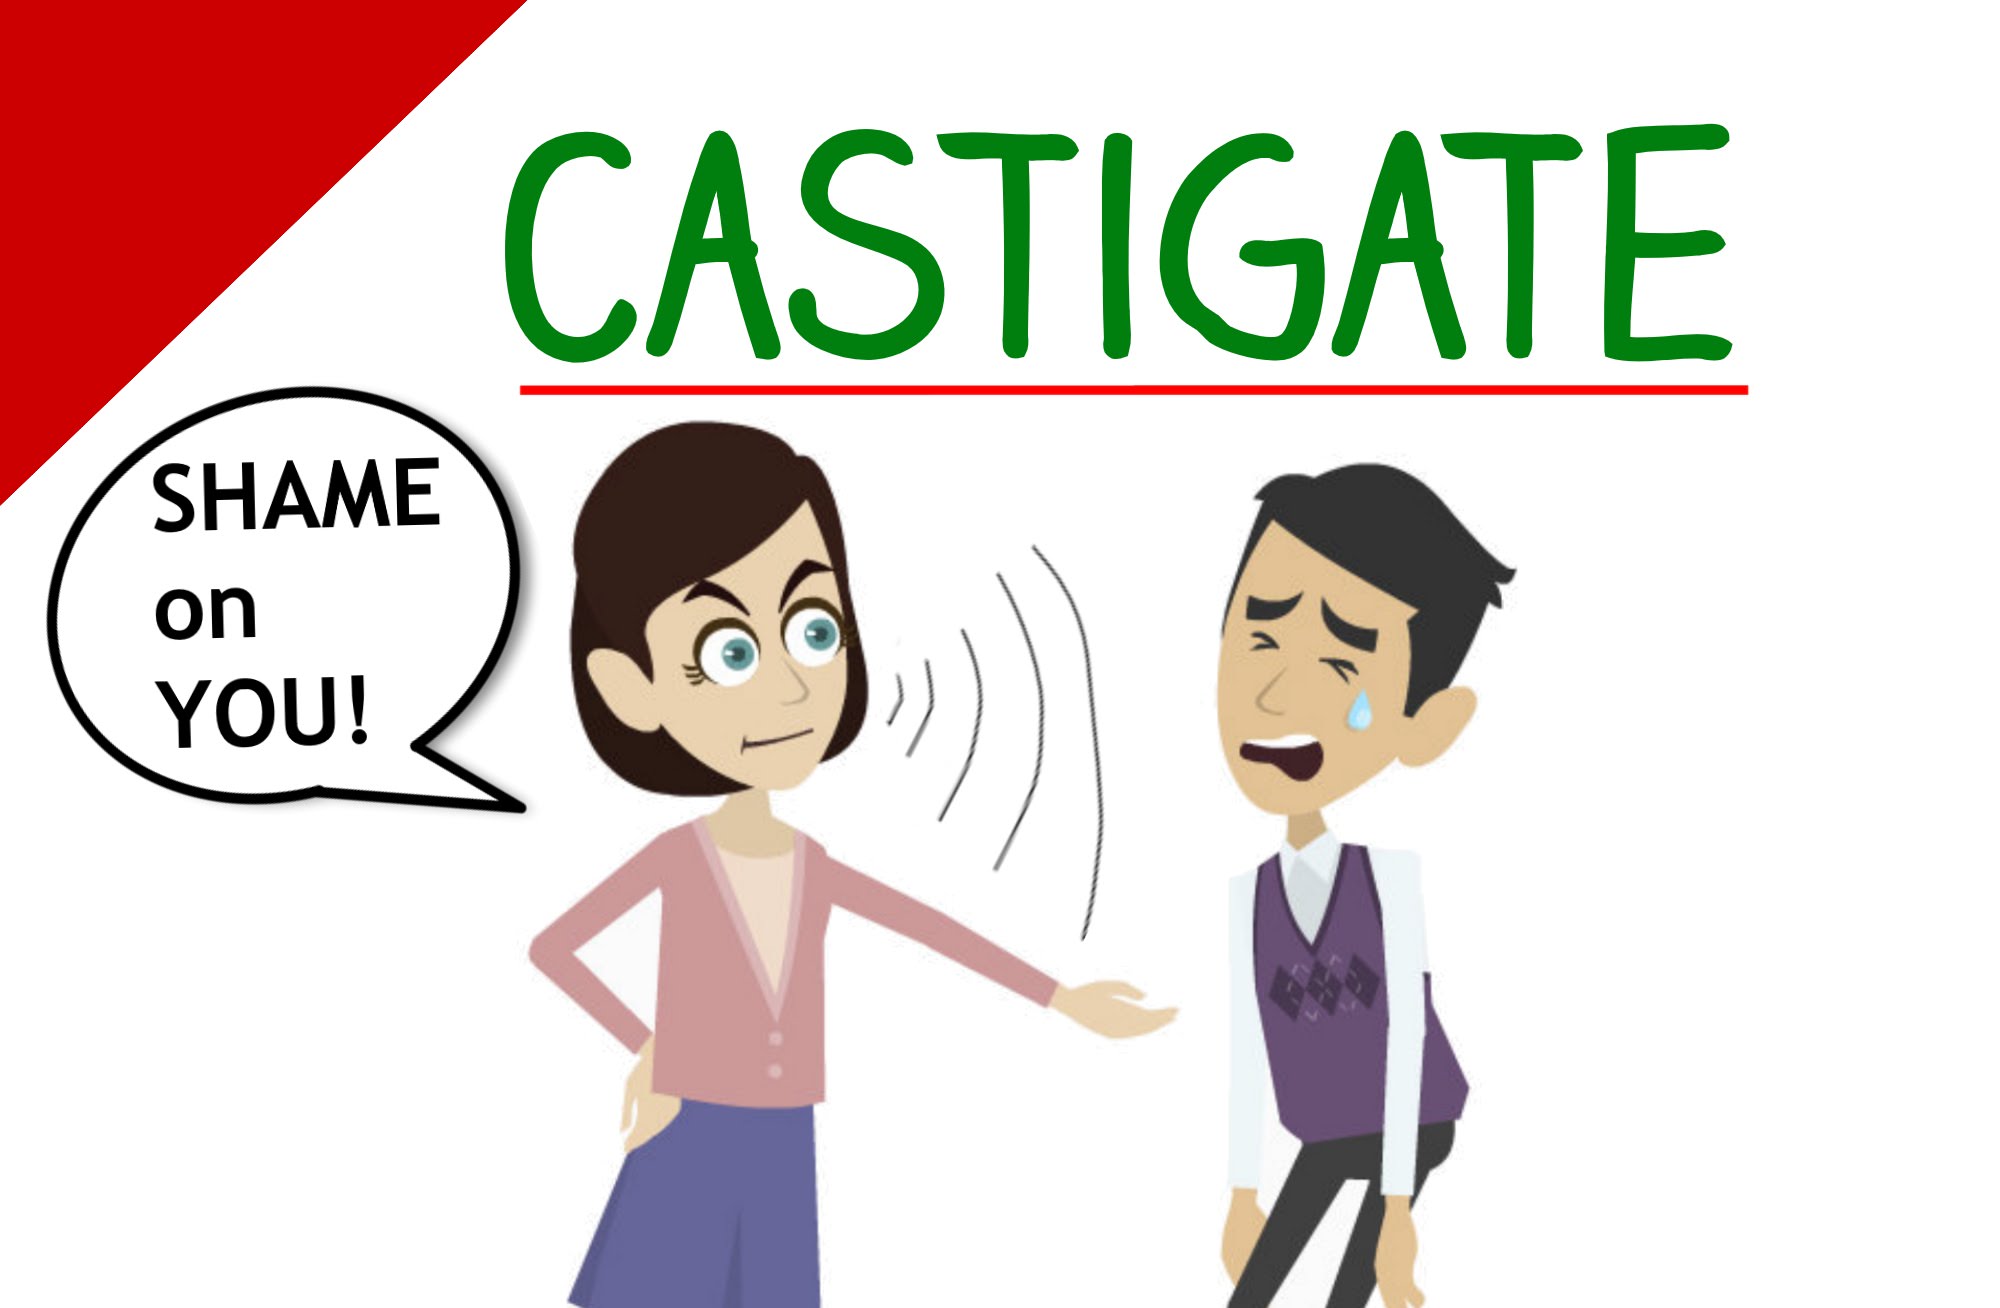 Use Castigation in a sentence